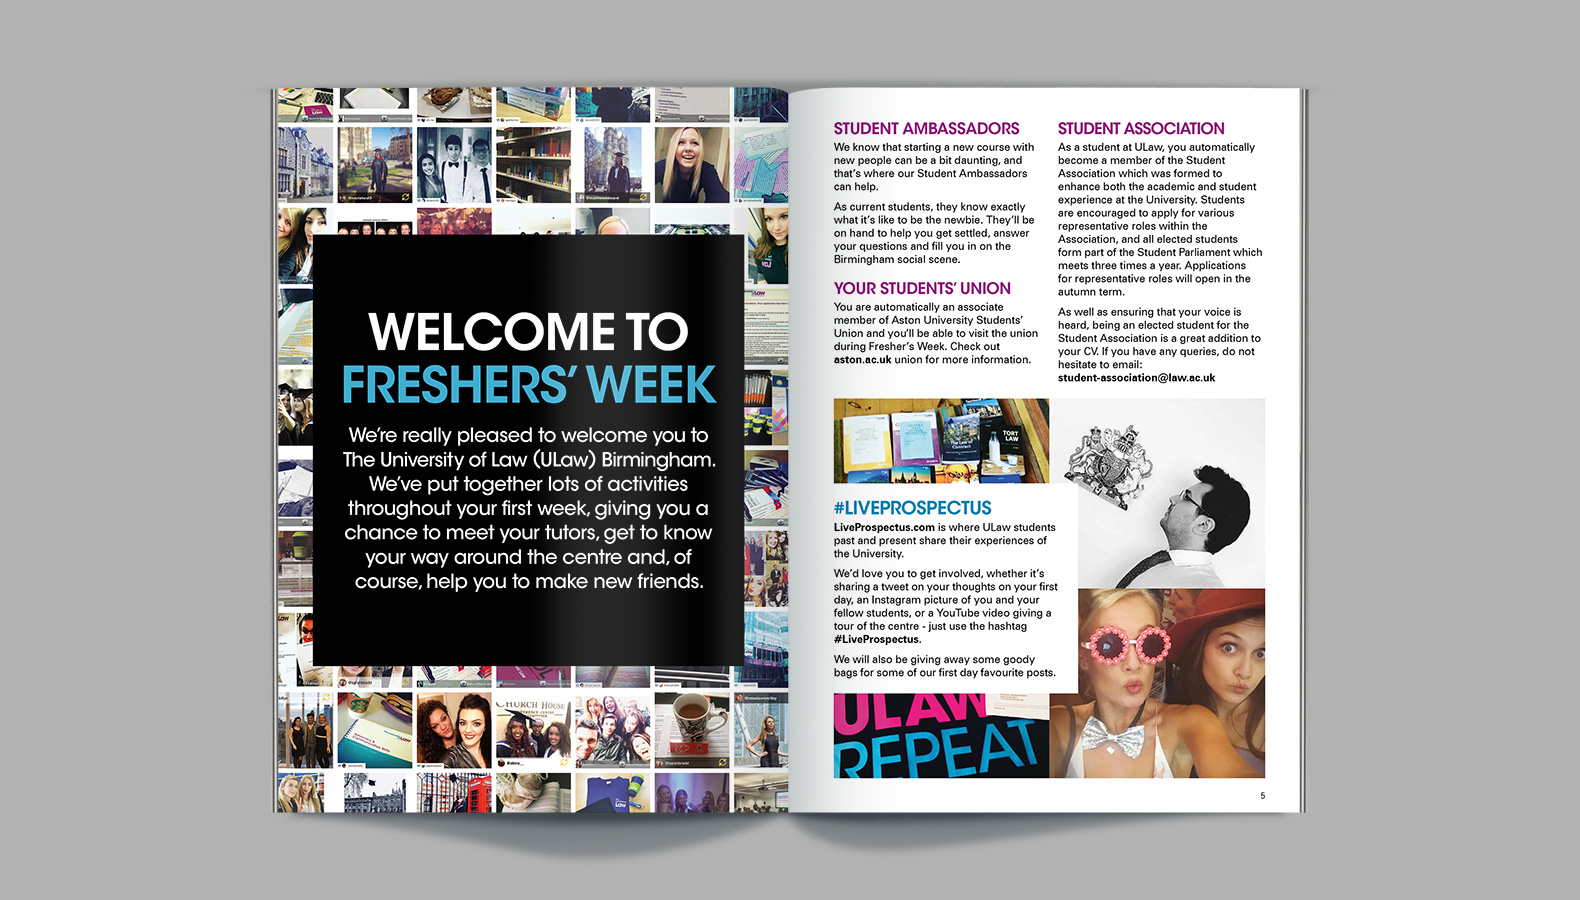 The University of Law – Freshers’ Campaign